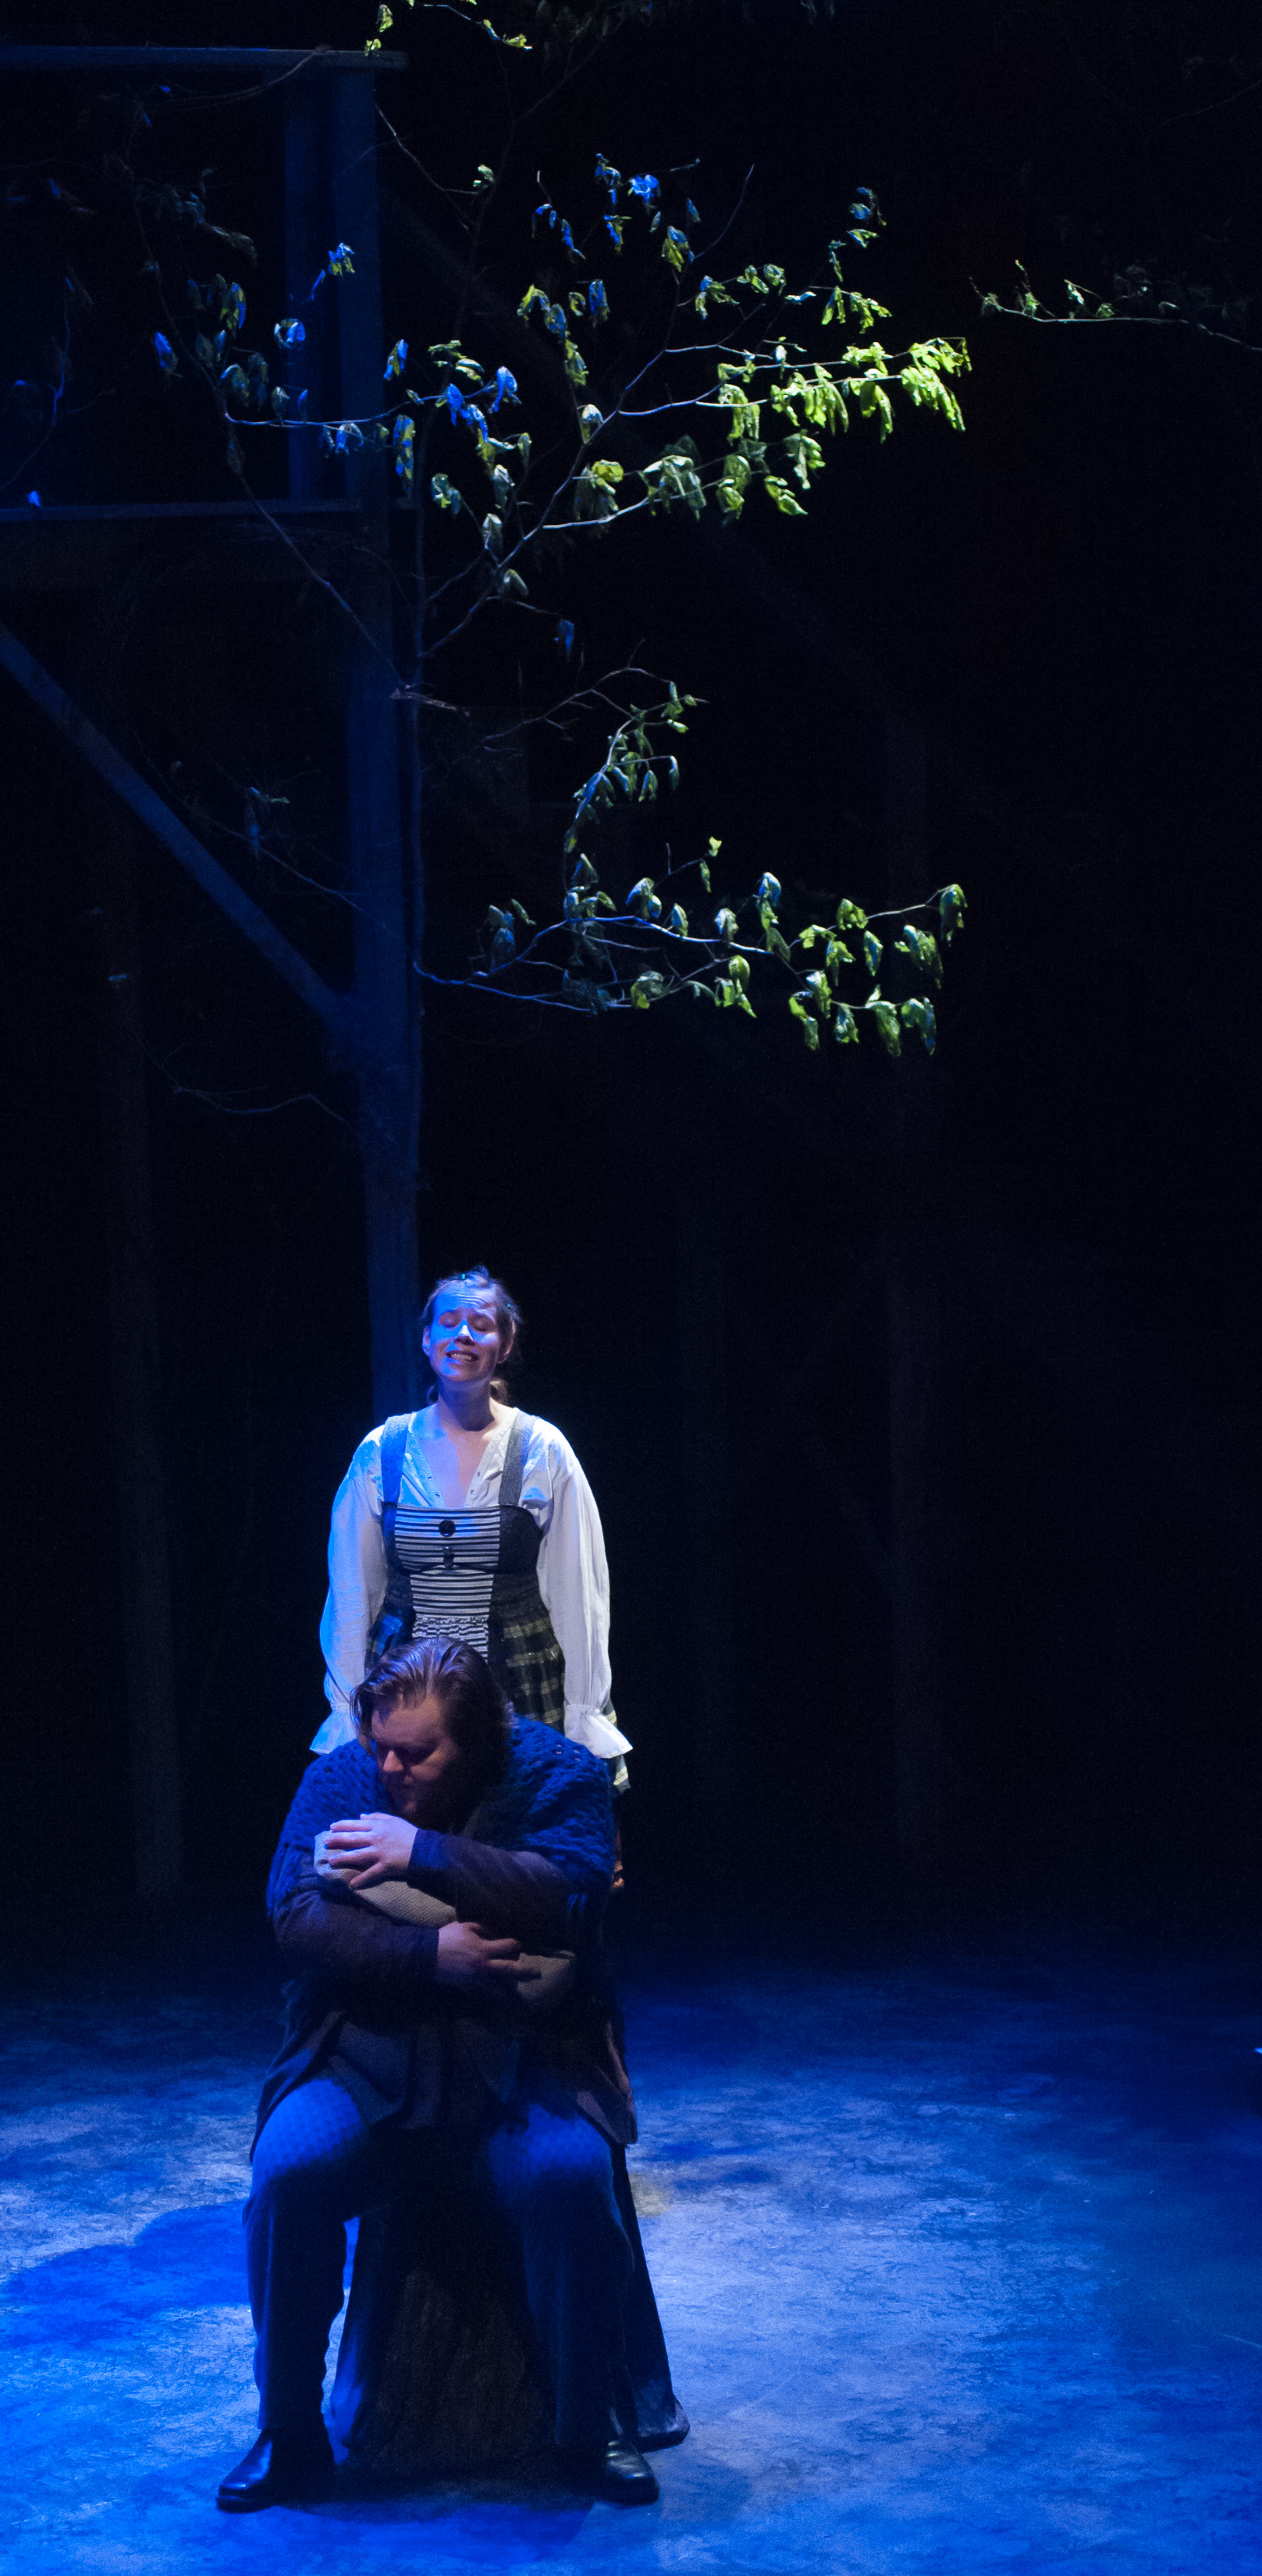 Carolyn Wesley and Nick Wheeler in LNT's 2017 production of Into The Woods  - cradling their infant child, under a treephoto by Robert Eddy